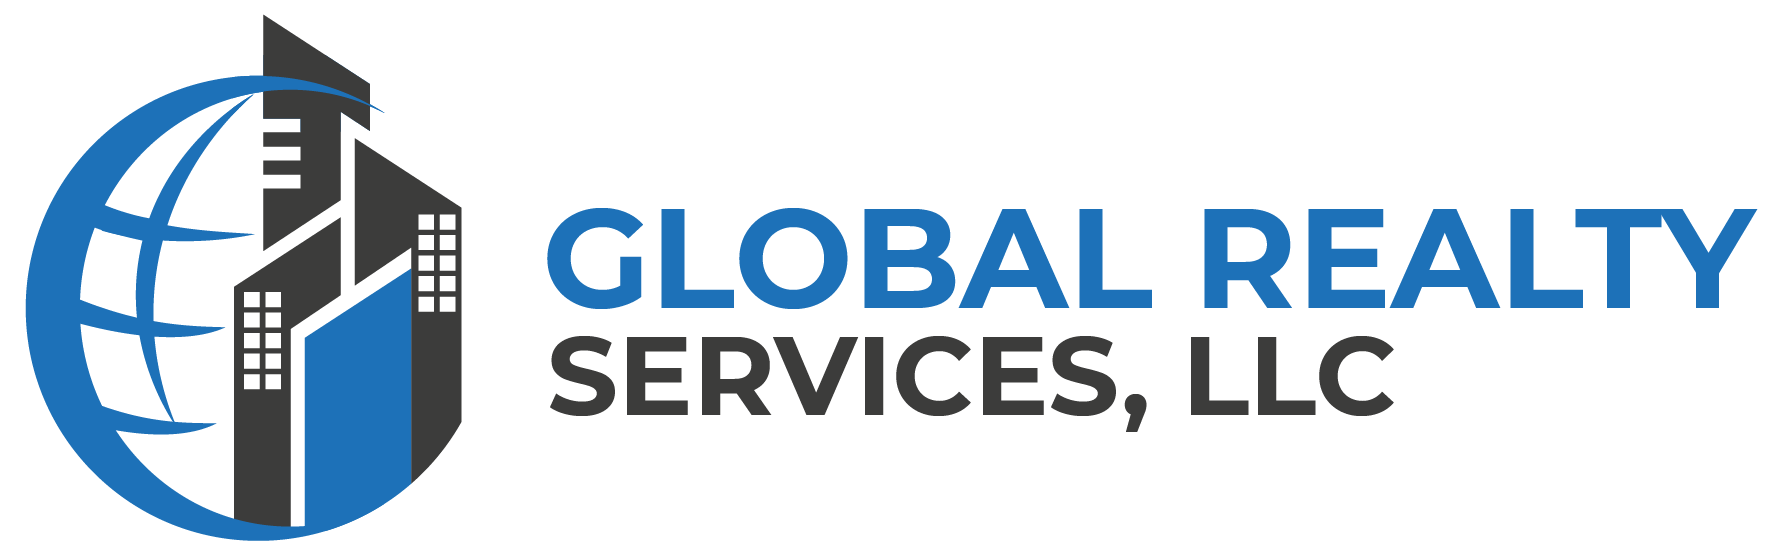 GLOBAL REALTY SERVICES LLC